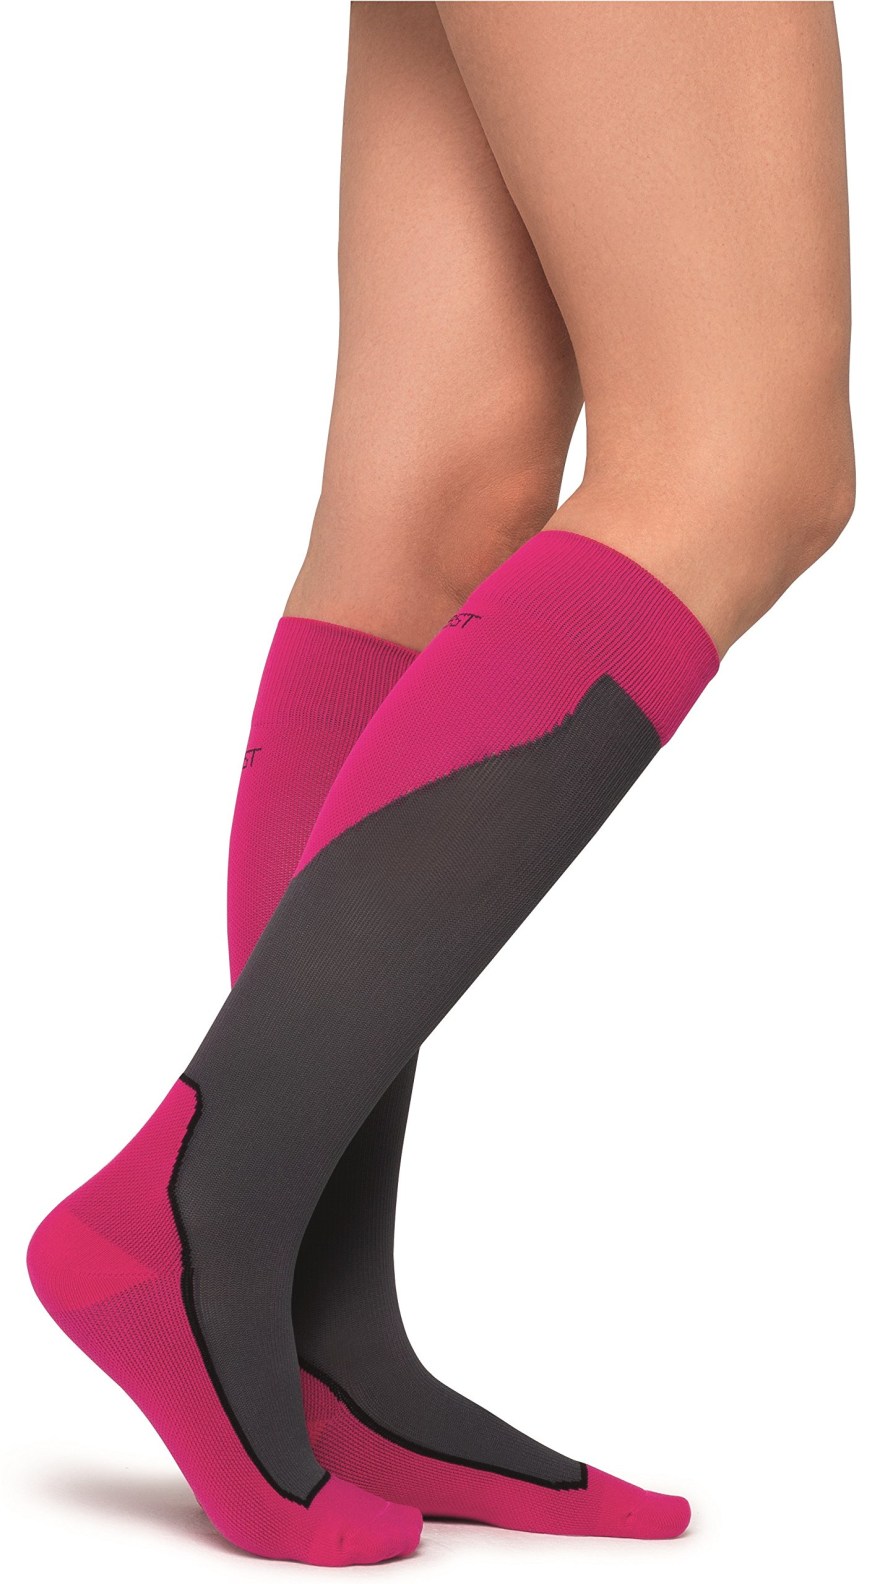 Picture of: JOBST Sport Knee High – mmHg Compression Socks, Pink/Grey, Small